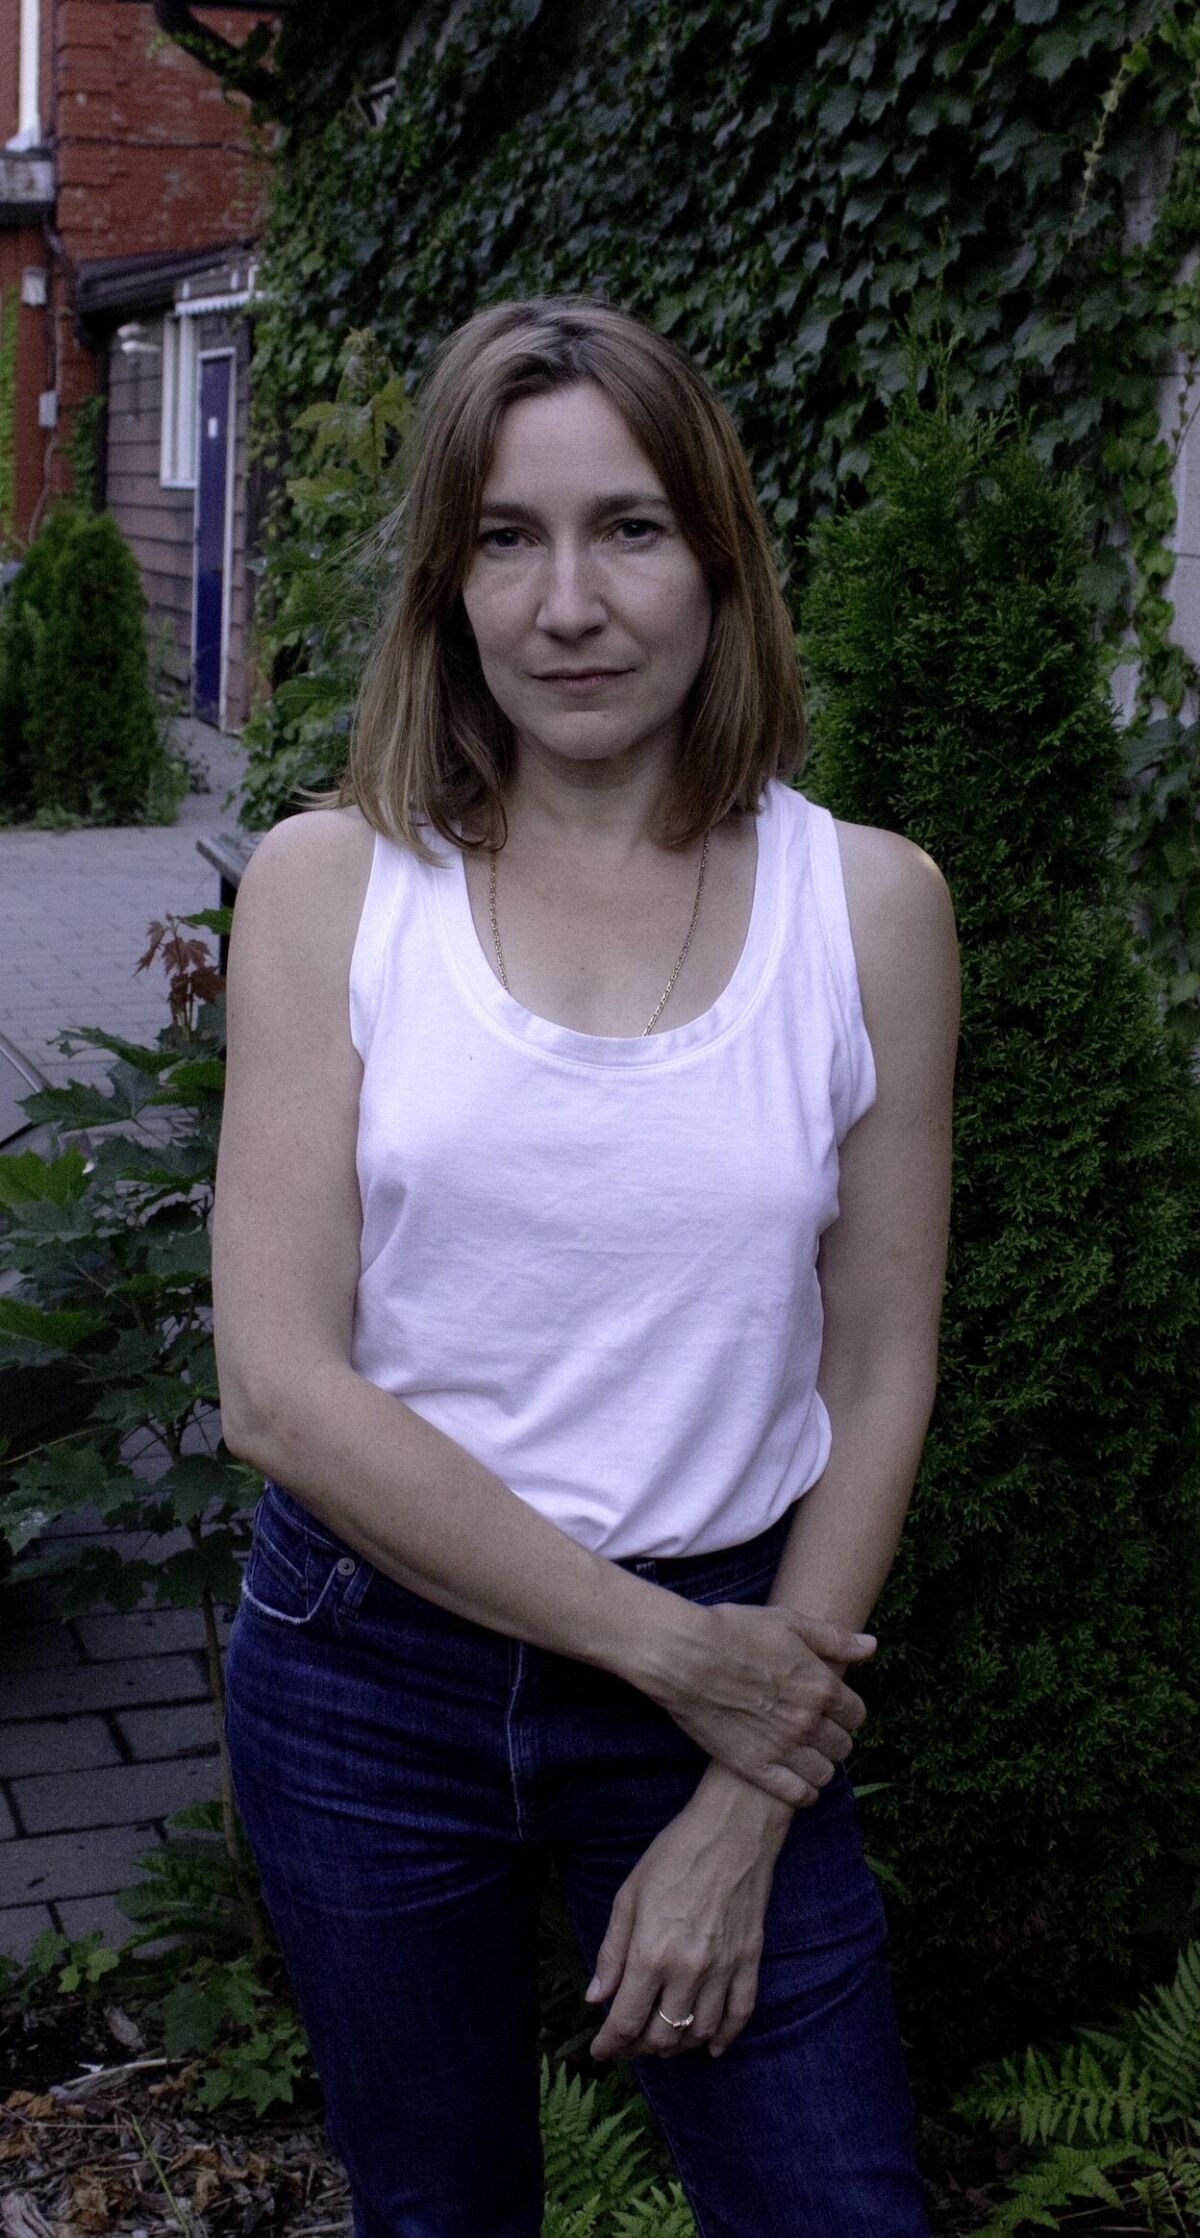 A woman in jeans and a white tanktop